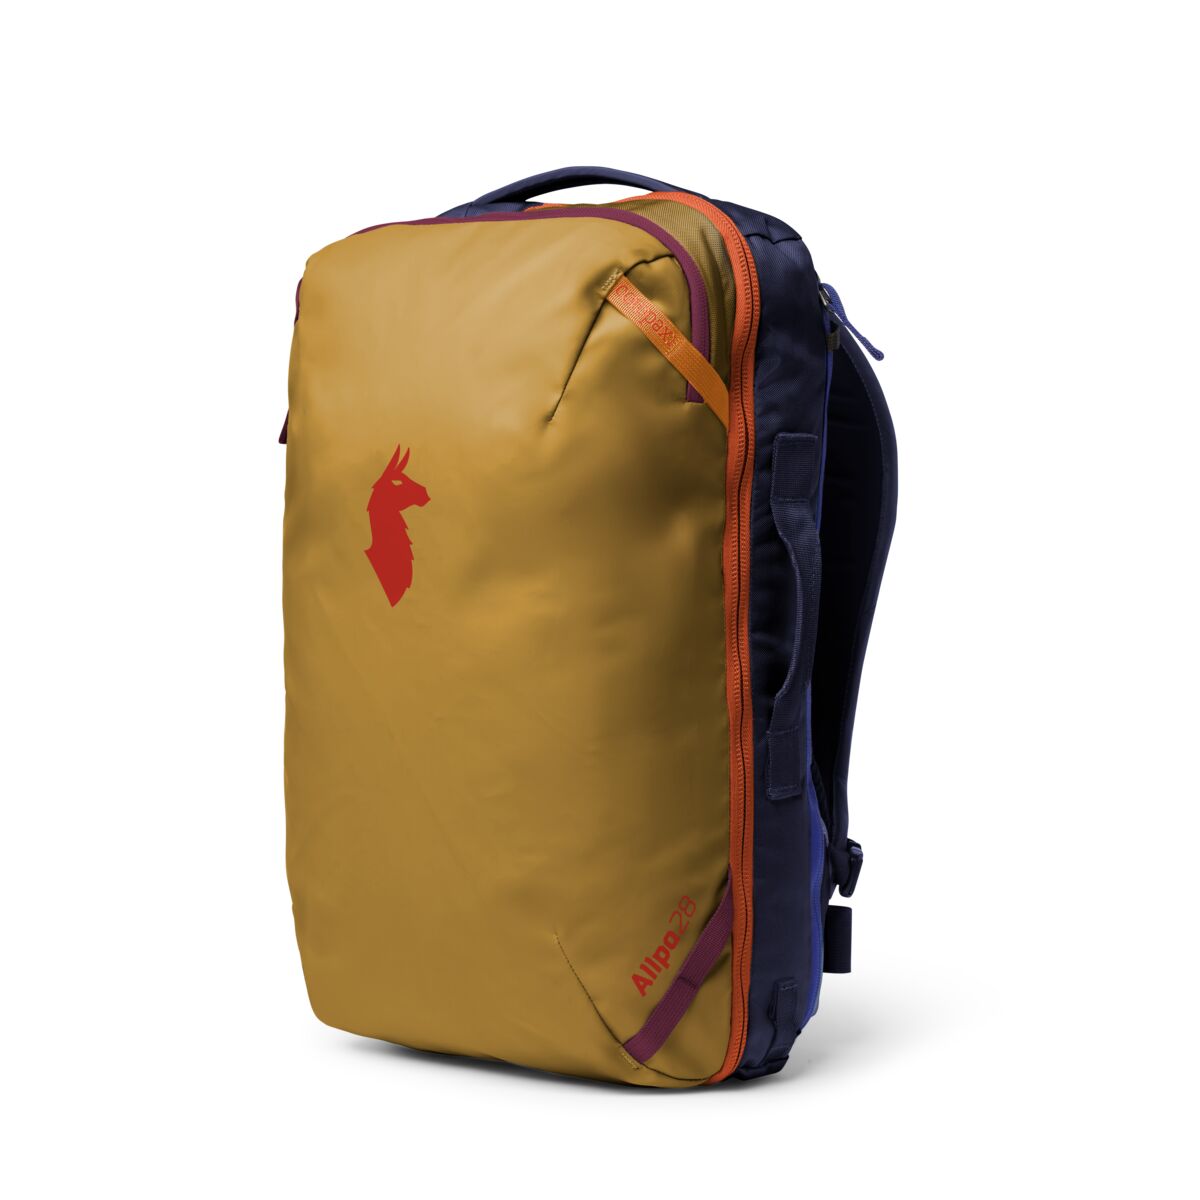 Cotopaxi Allpa 28L Travel Pack in Amber – Cotopaxi UK